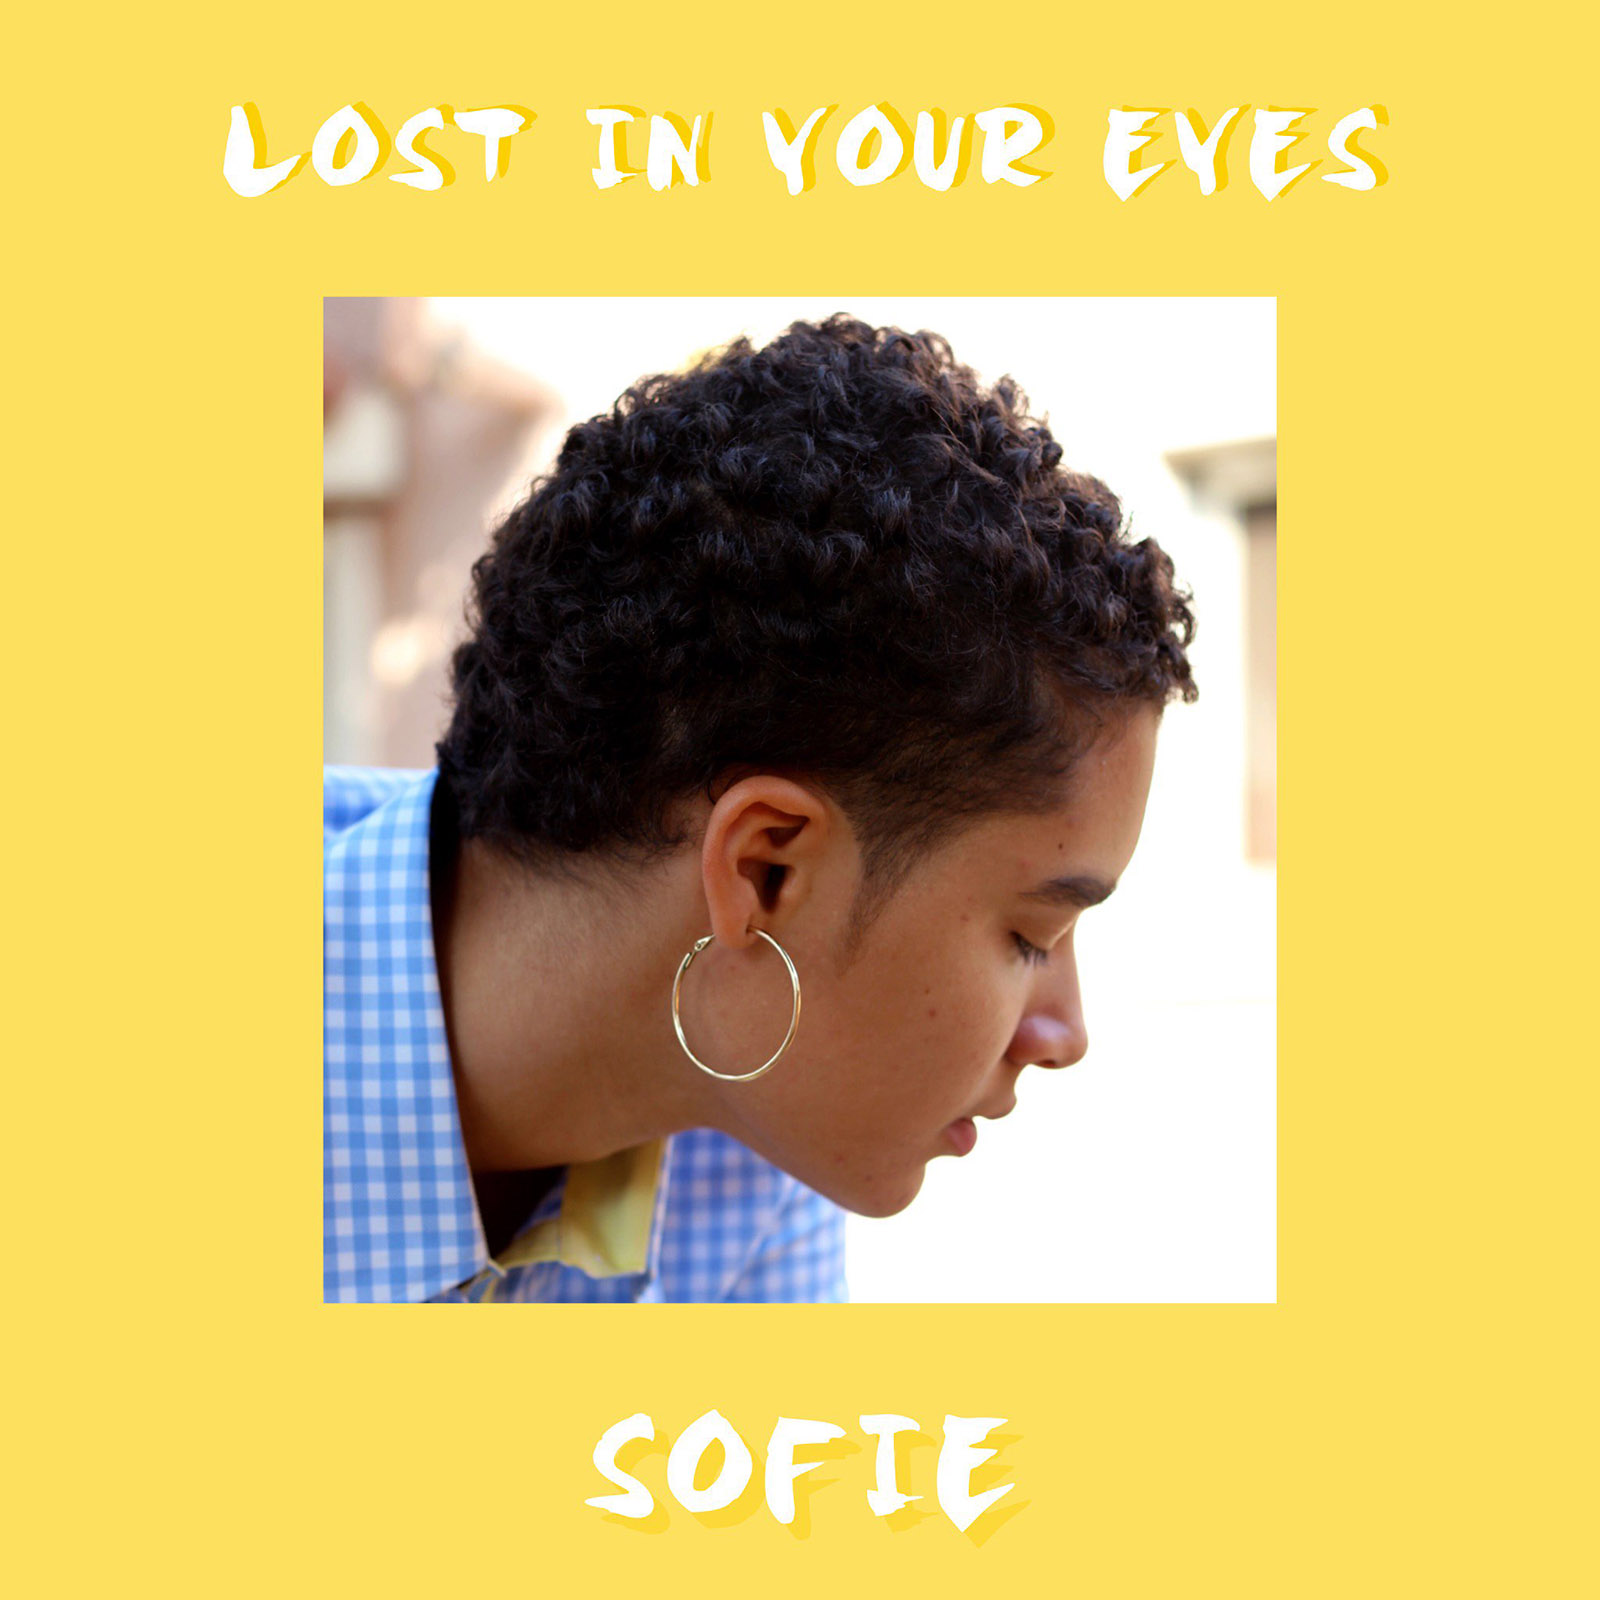 Lost In Your Eyes by Sofie